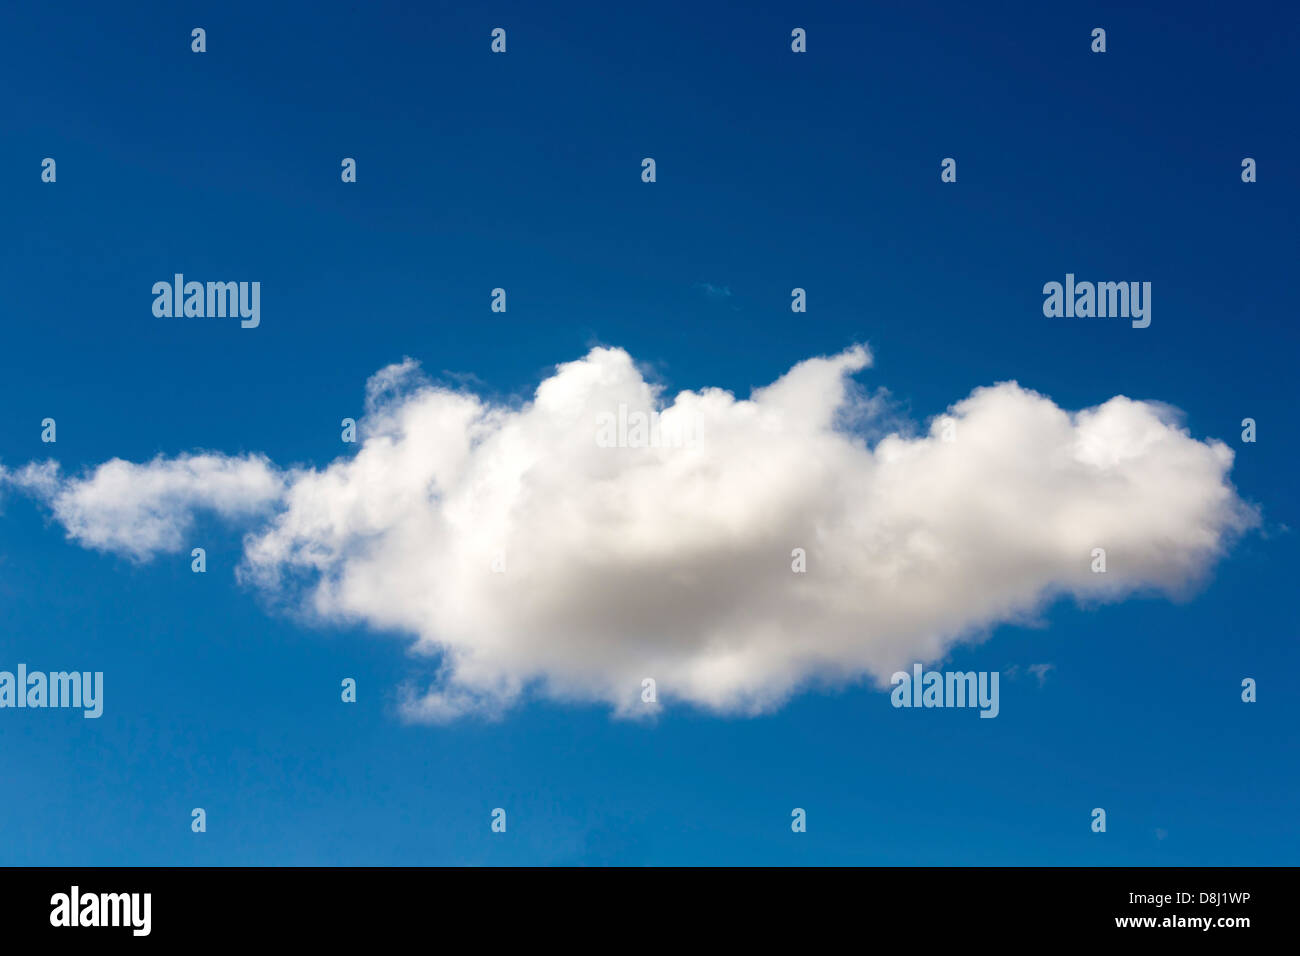 Cloud formation, blue sky Stock Photo